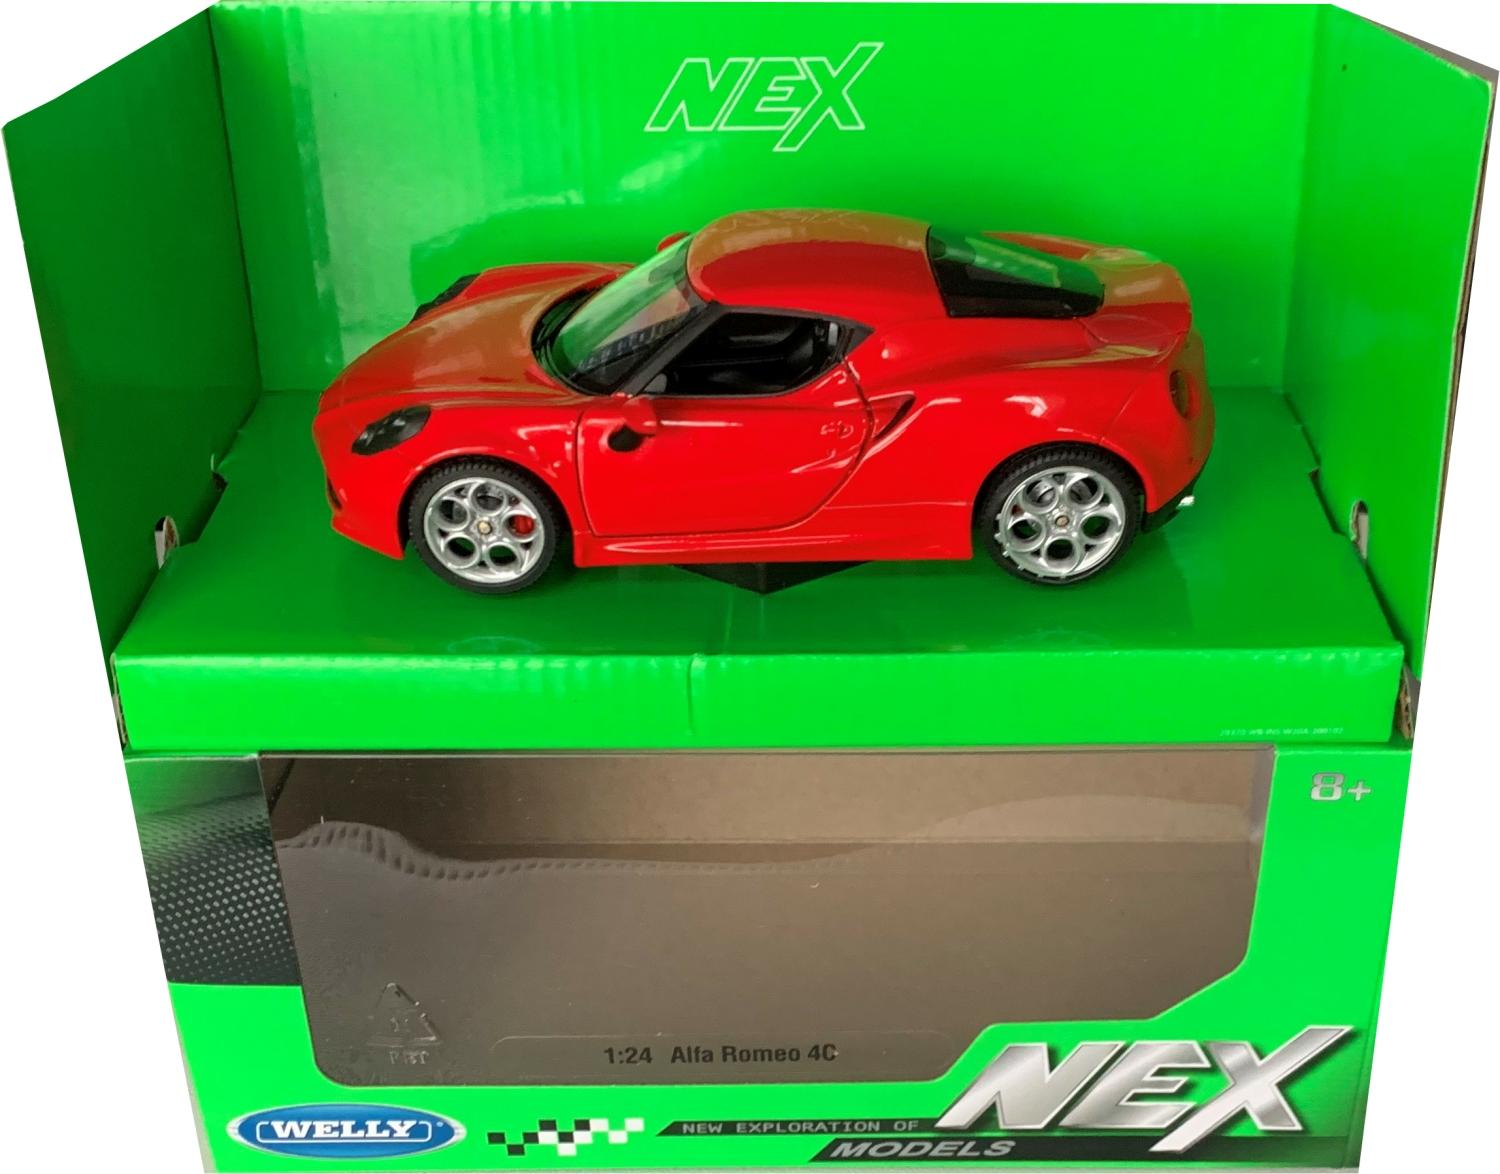 Alfa Romeo 4C in red 1:24 scale model from Welly